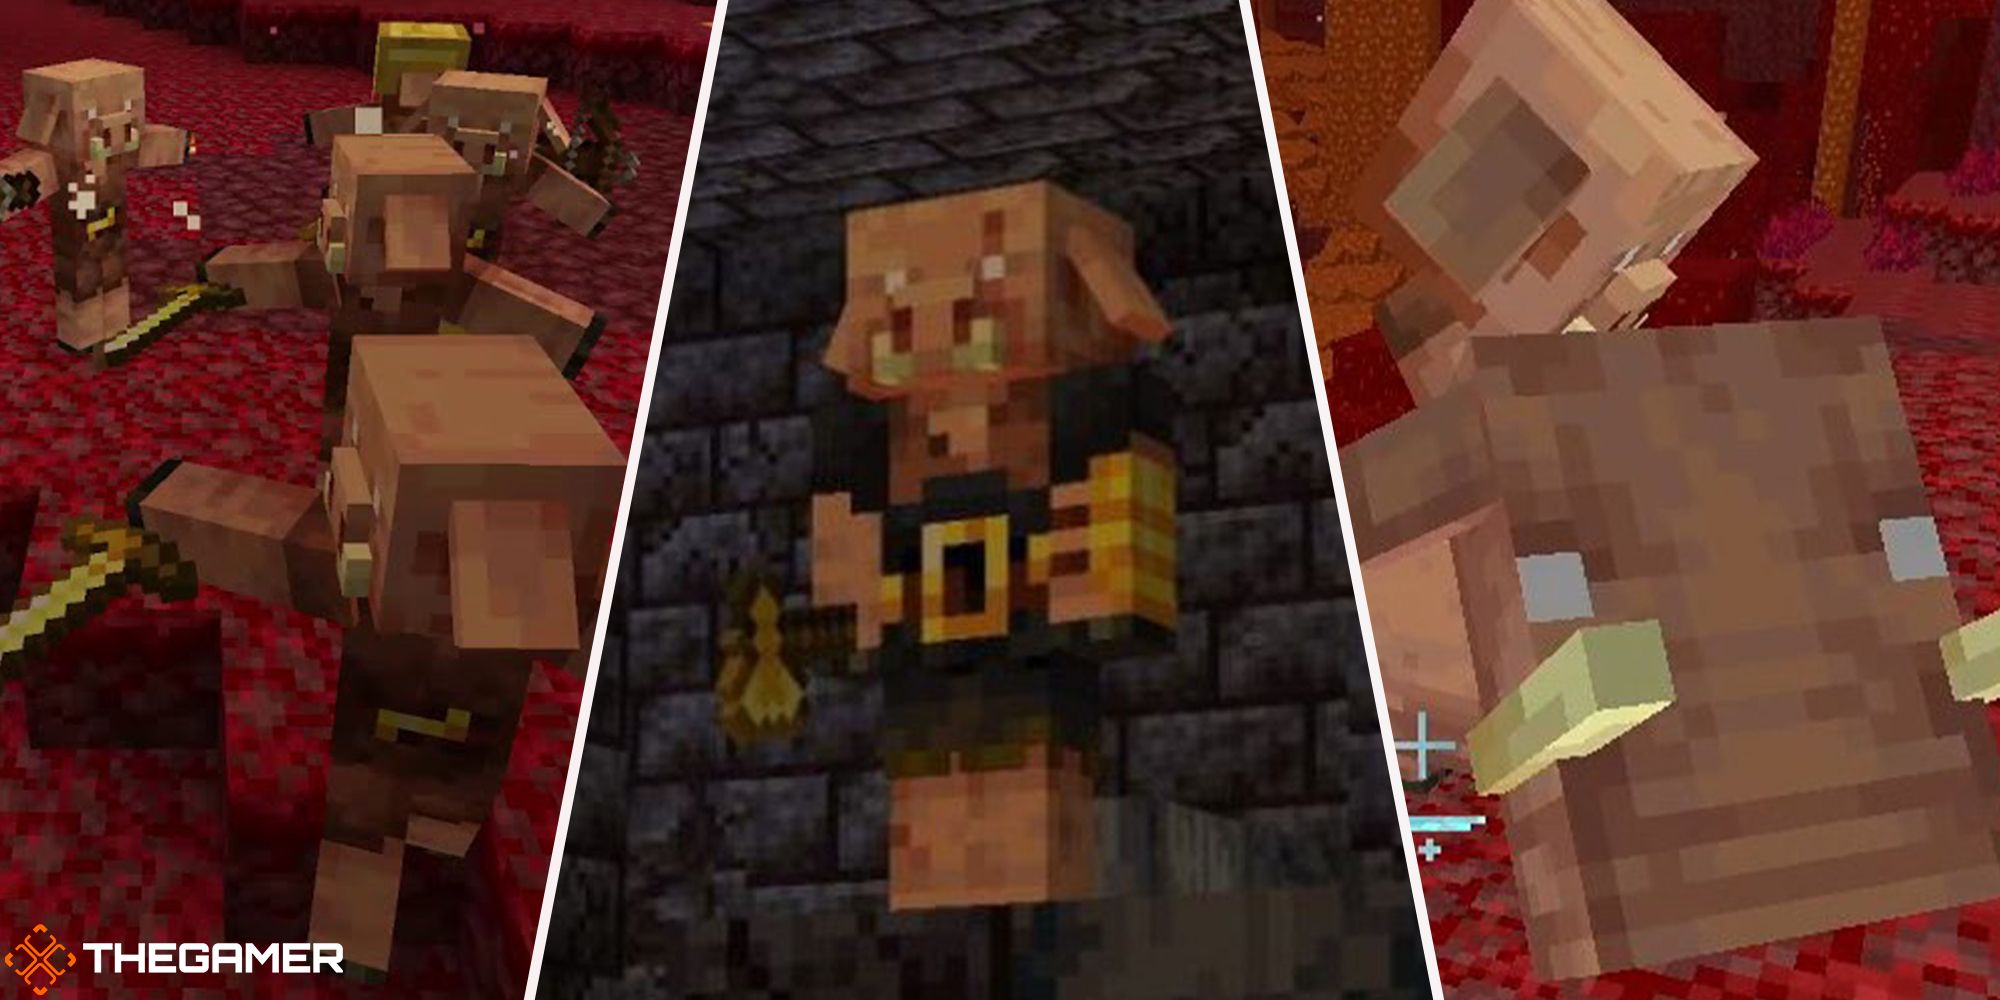 Minecraft - Piglin celebrating on left, Baby Piglin on a Baby Hoglin on right, and a Brute Piglin in the centre